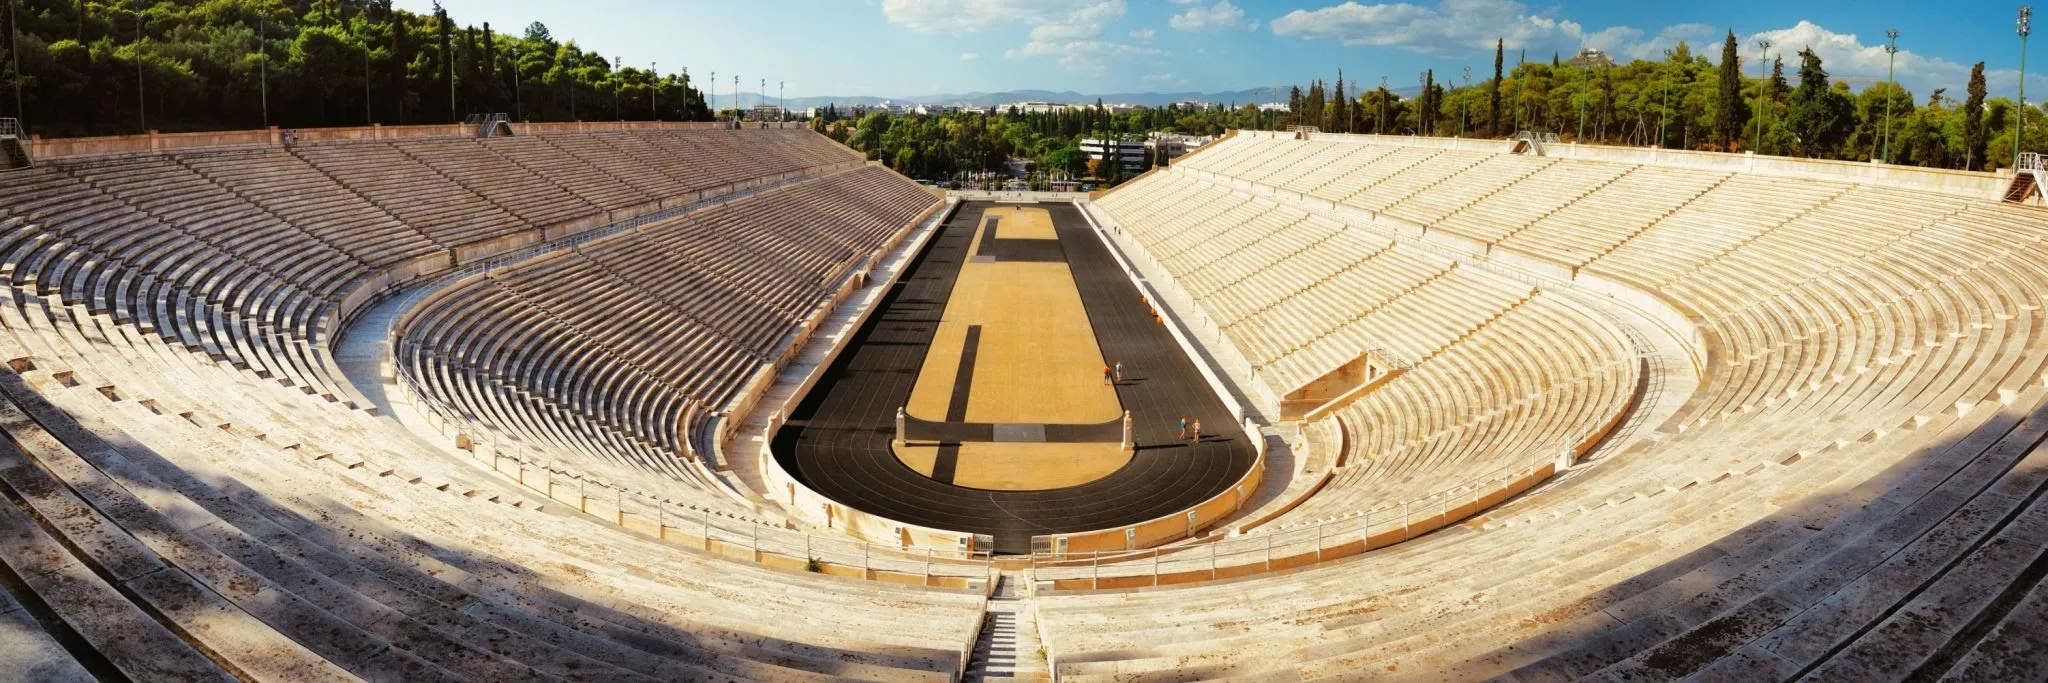 Panathinaikos in Greece, Europe | Architecture - Rated 4.2